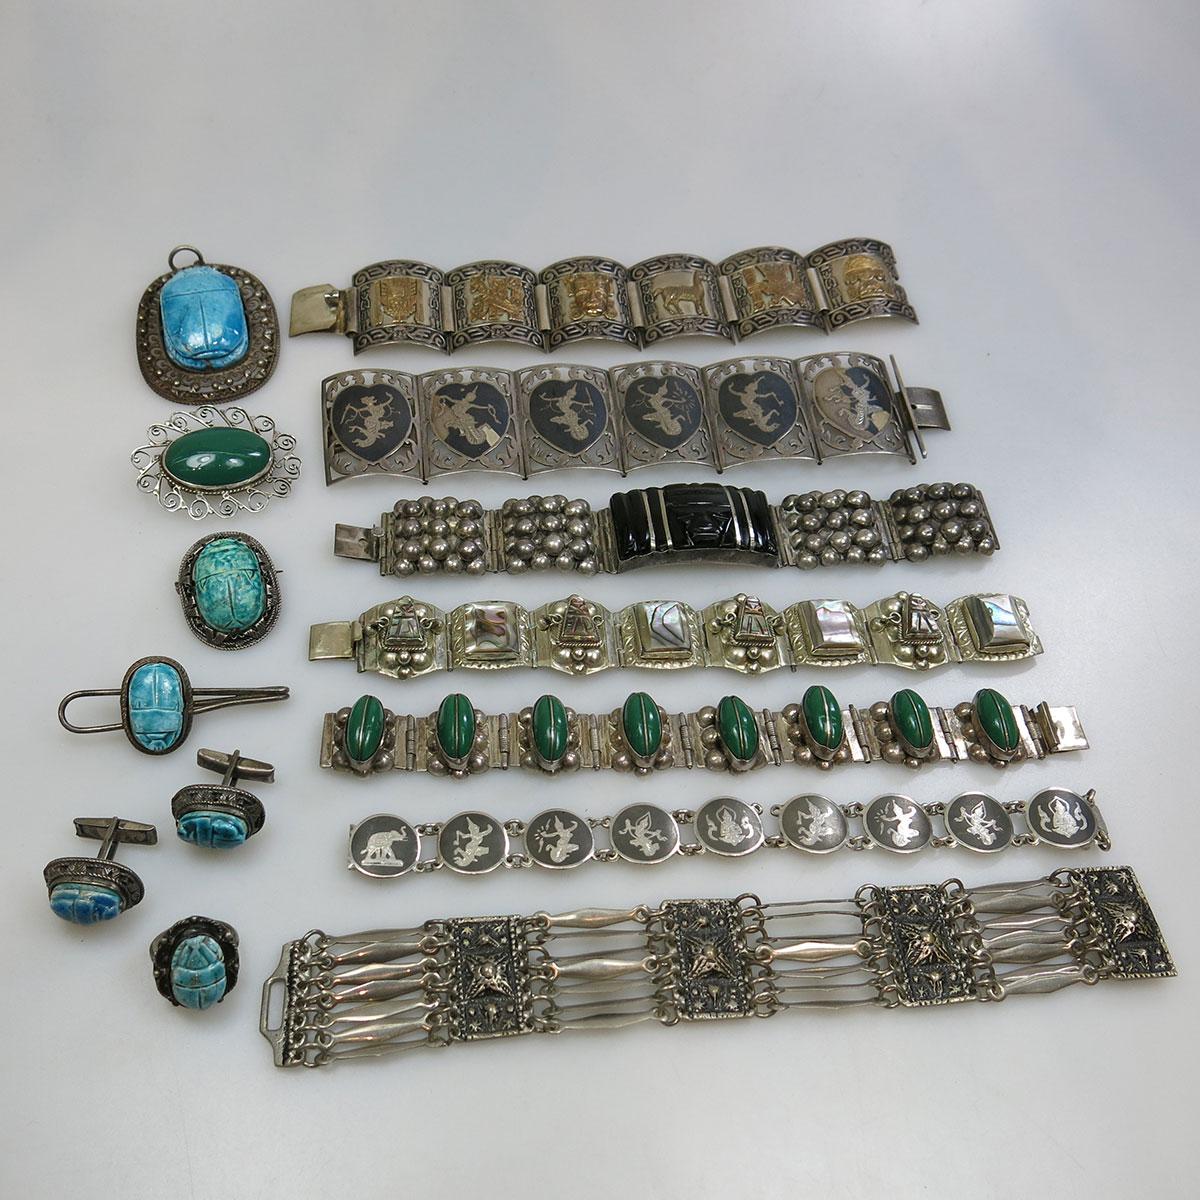 Small Quantity Of Various Silver And Silver-Plated Jewellery